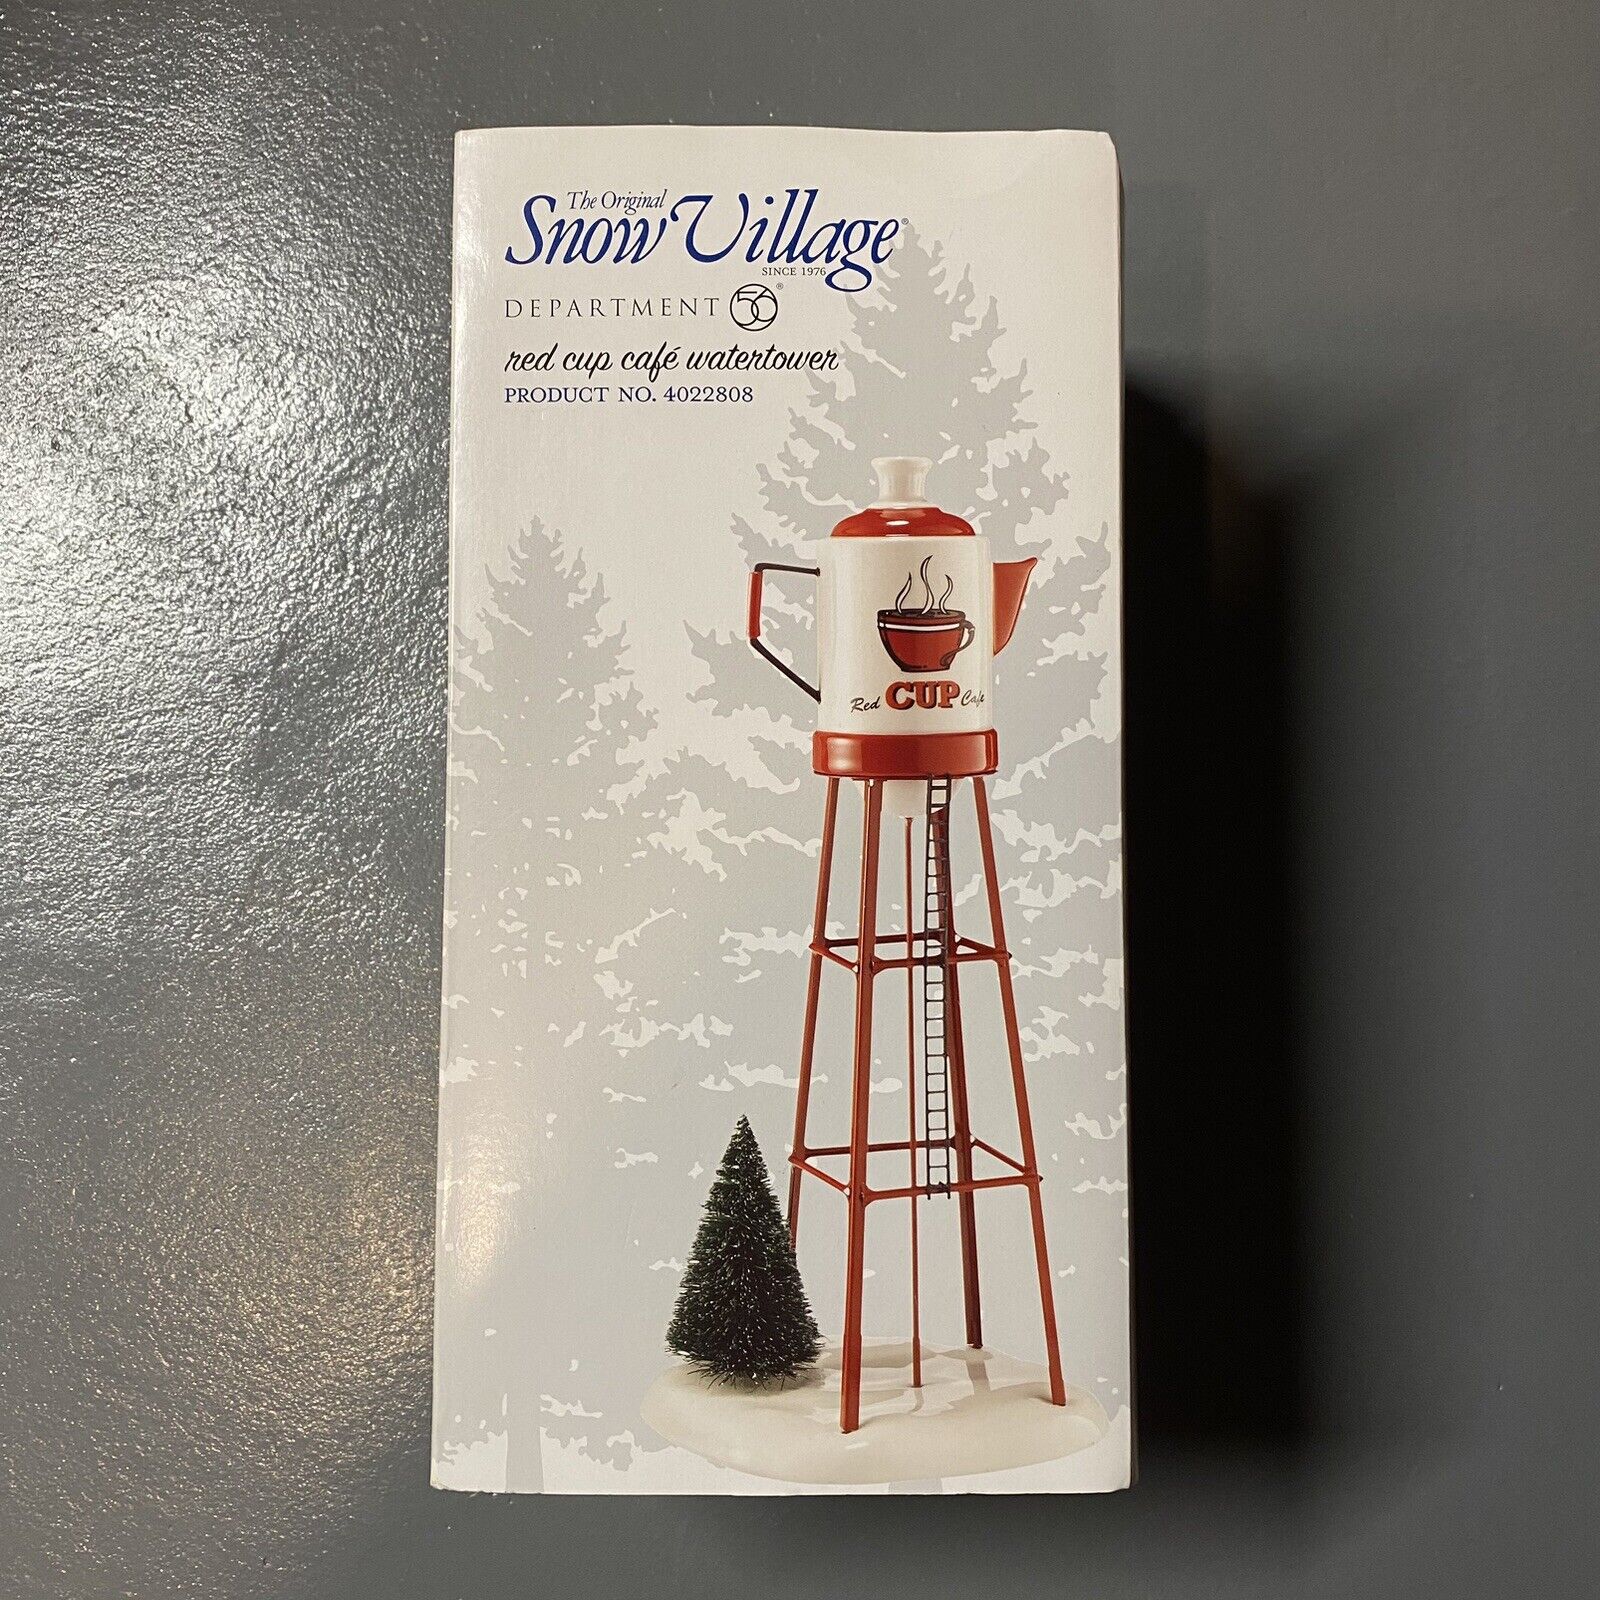 department 56 original snow village NEW Brand  Accessory  RED CUP WATERTOWER